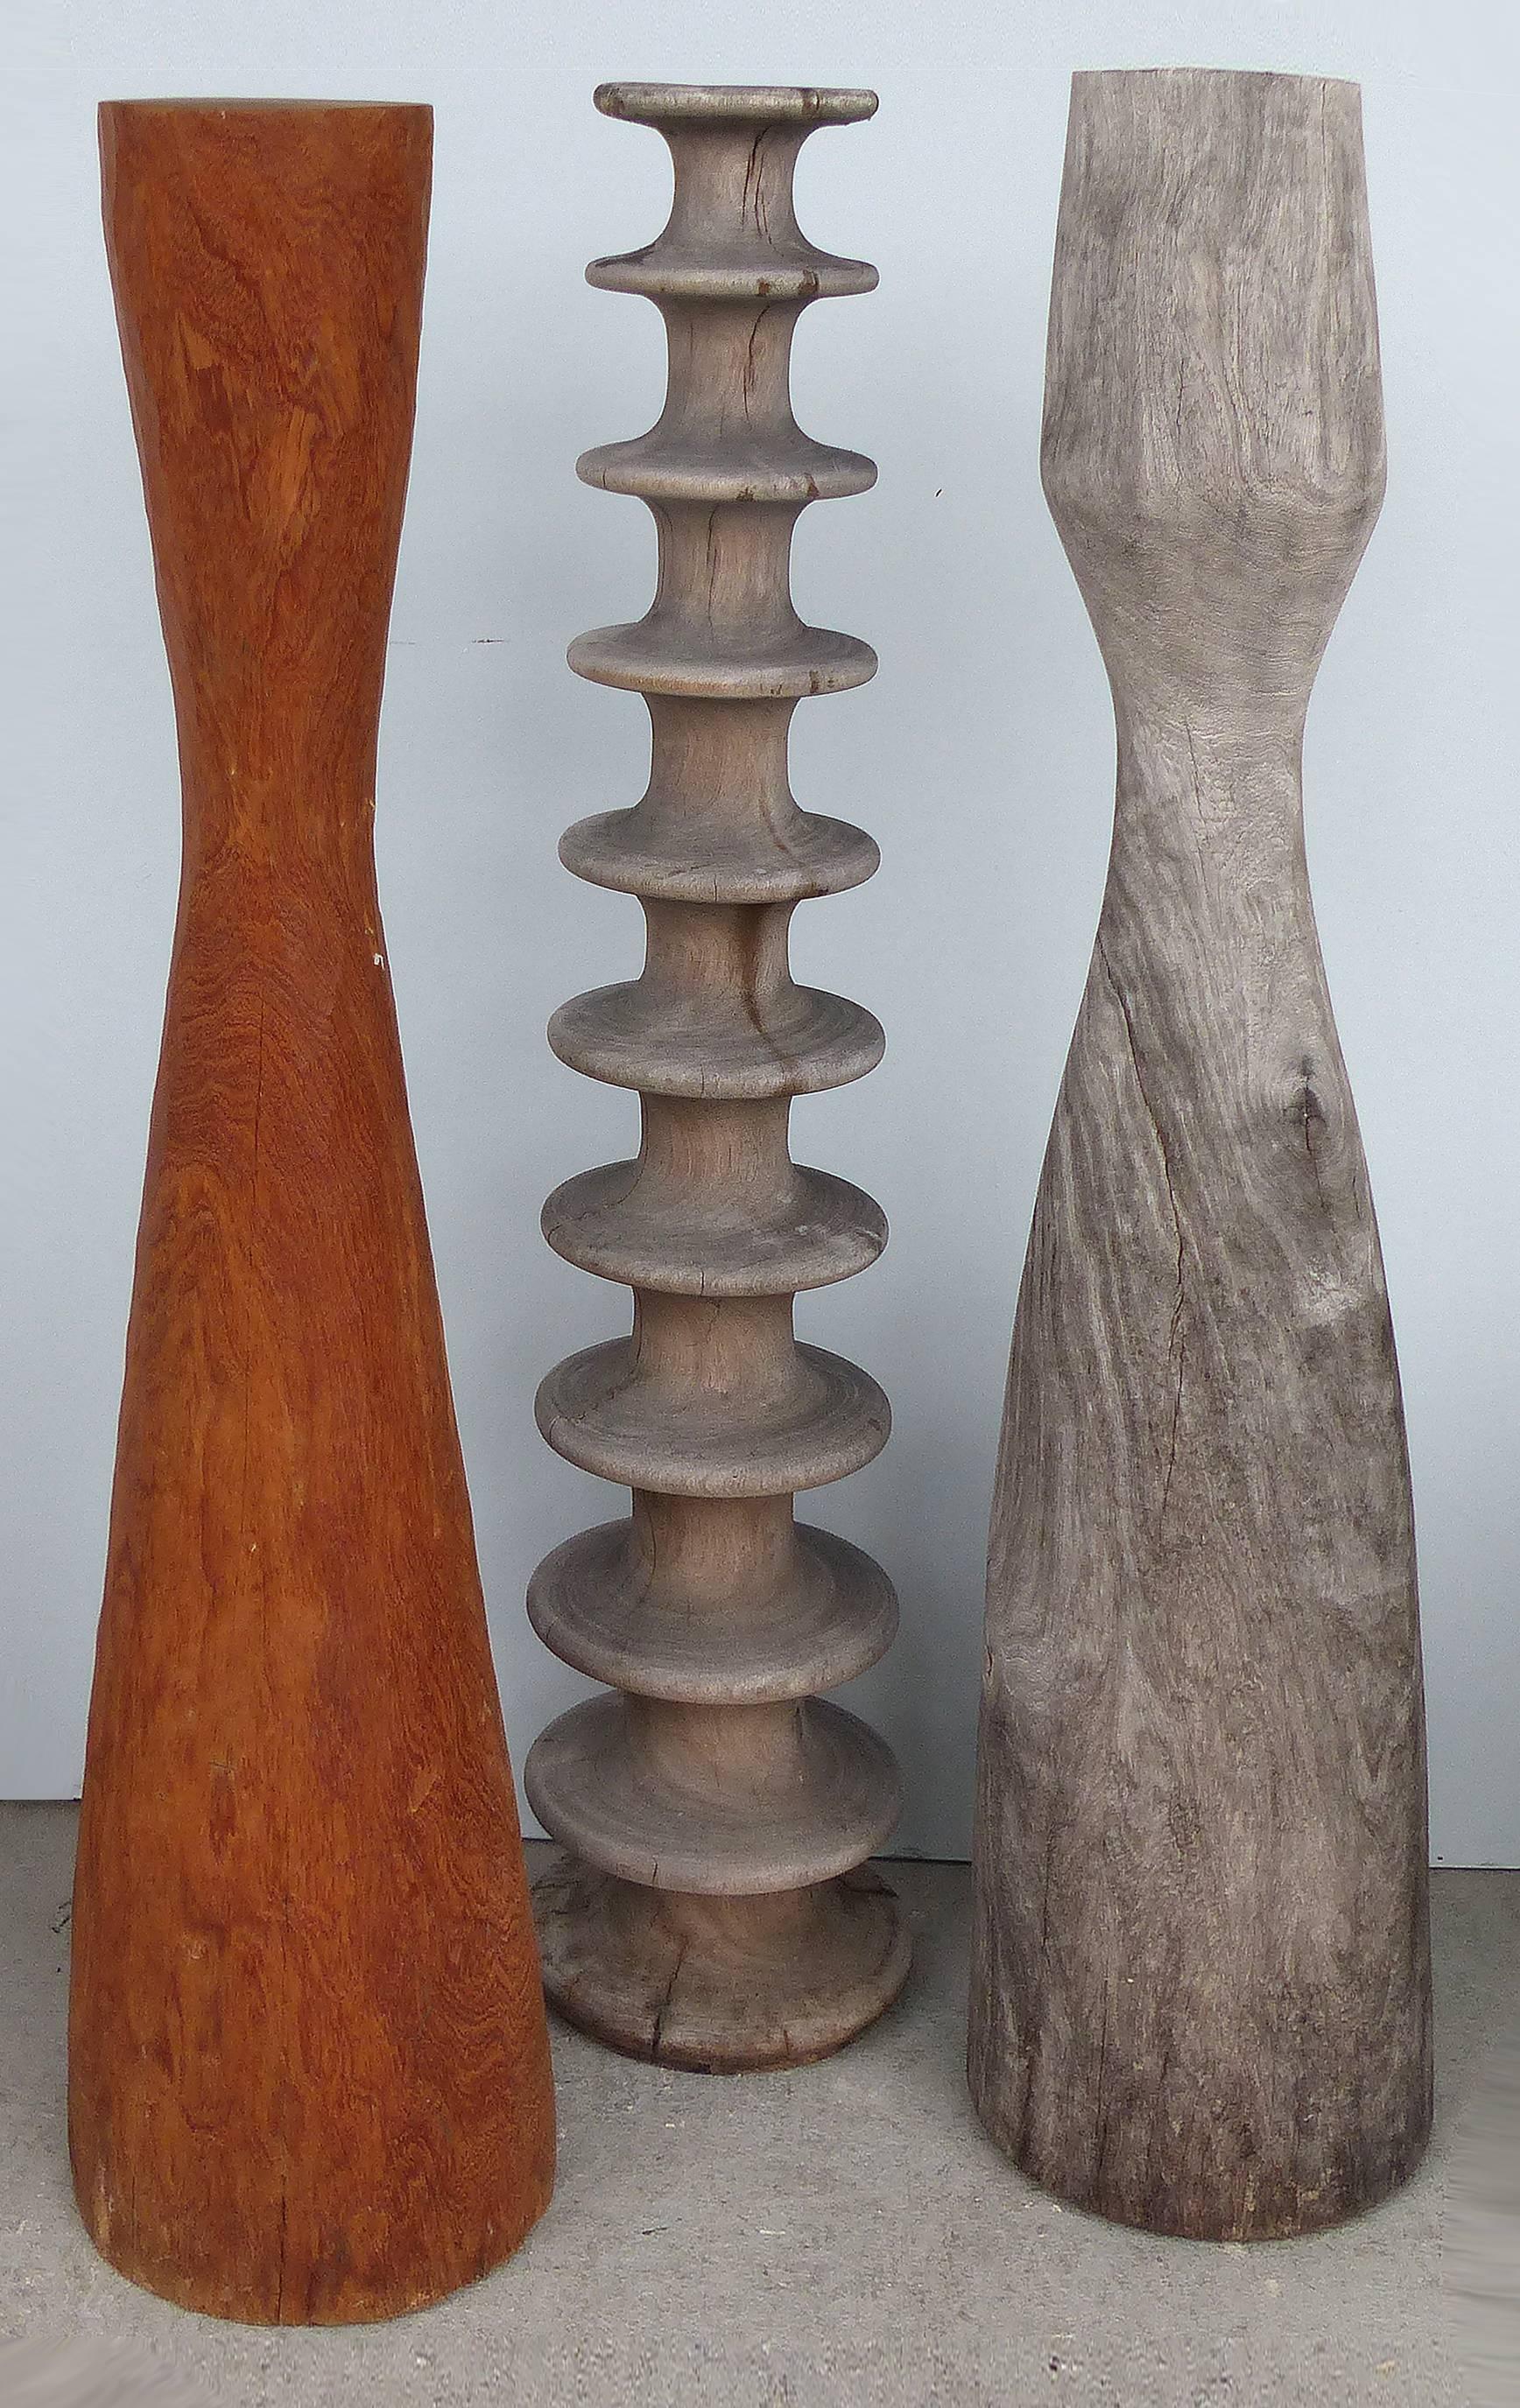 Offered for sale are three individual sculptural decorative columns. Each has its own characteristics and is sold individually. The measurements are as follows: Spindle column, 39.5